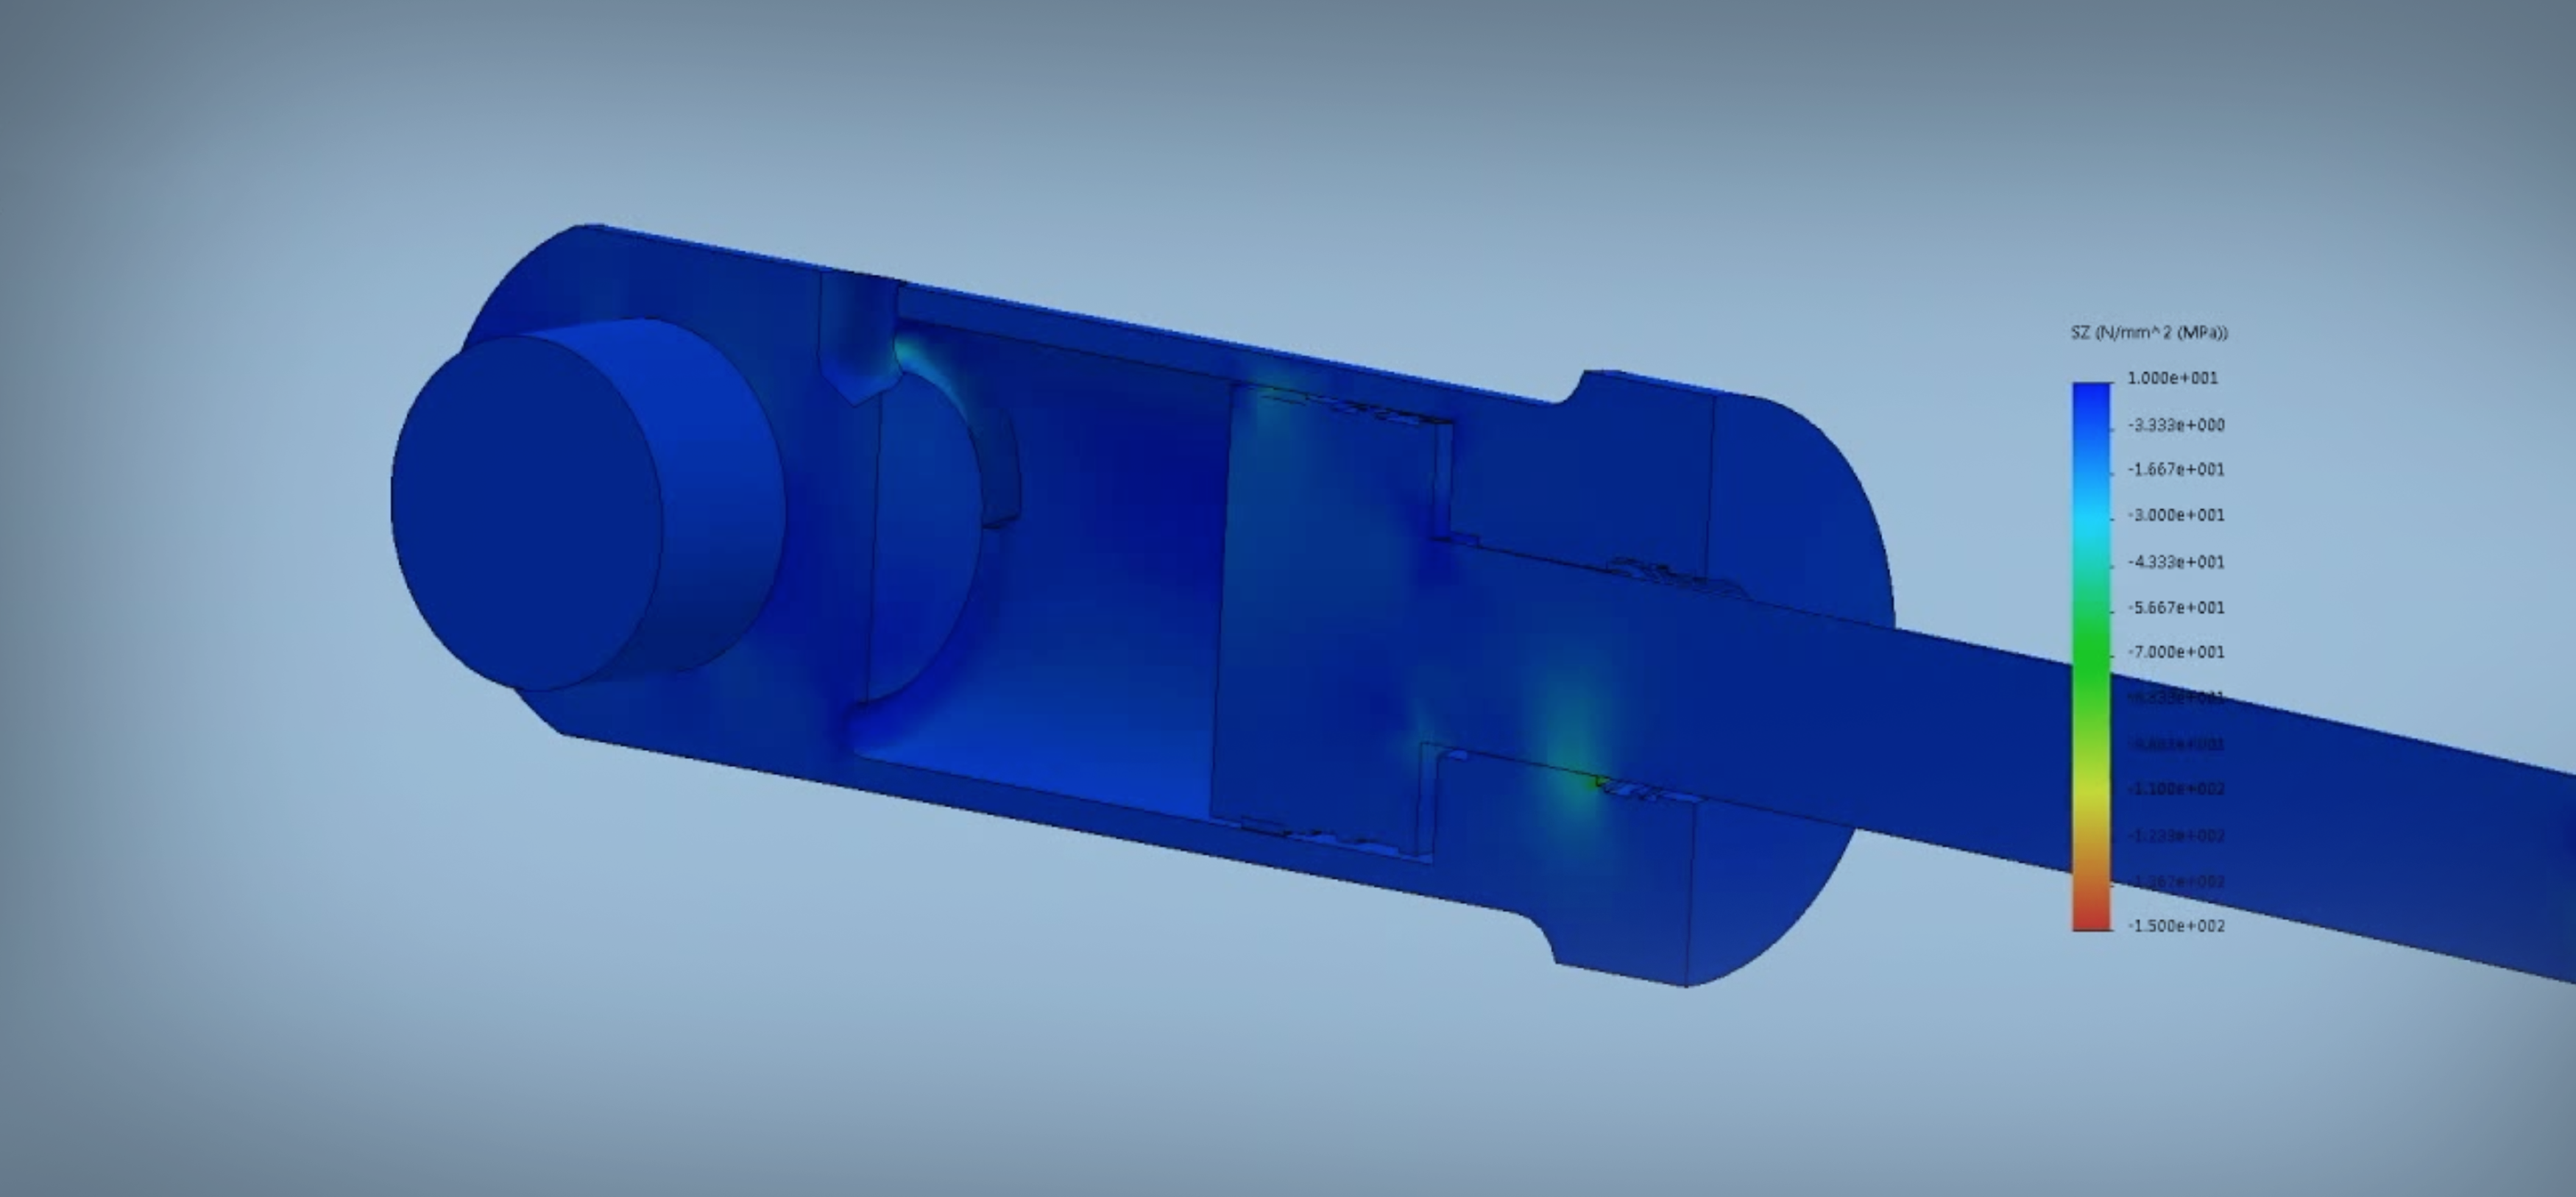 A cylinder cross-section revealing important factors, and how our optimization process can help reduce stressors.